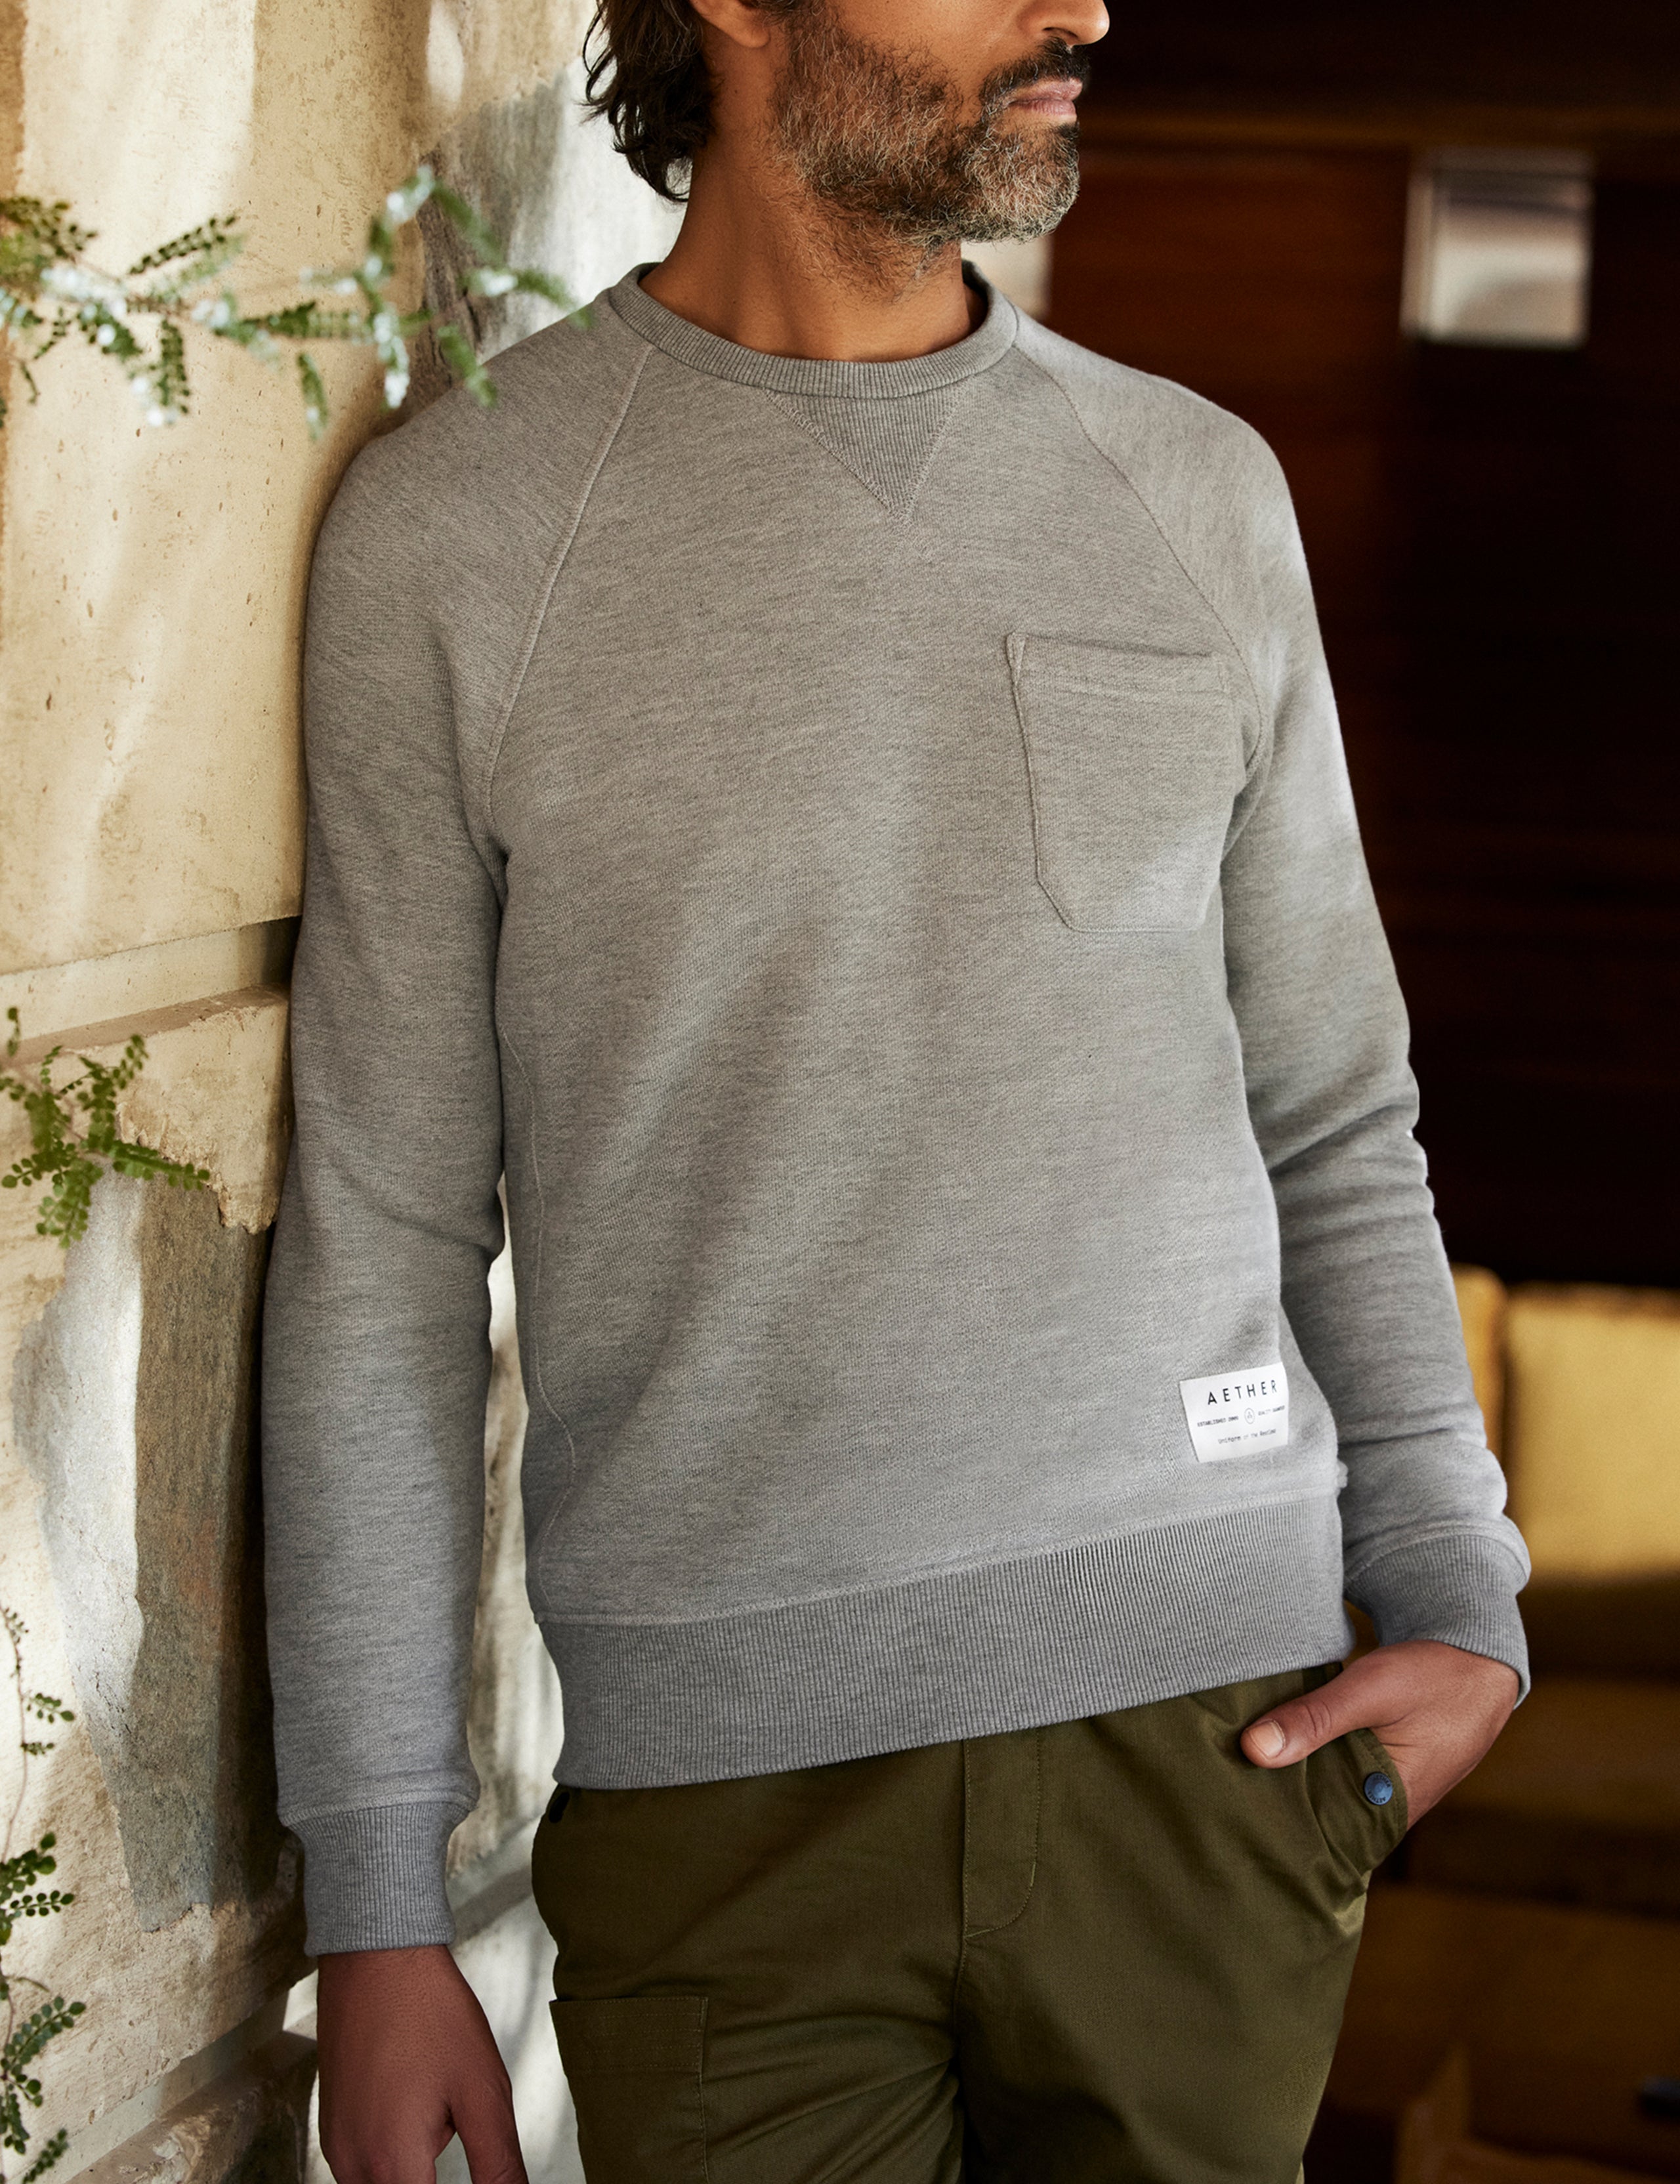 man wearing a grey crew neck with pocket